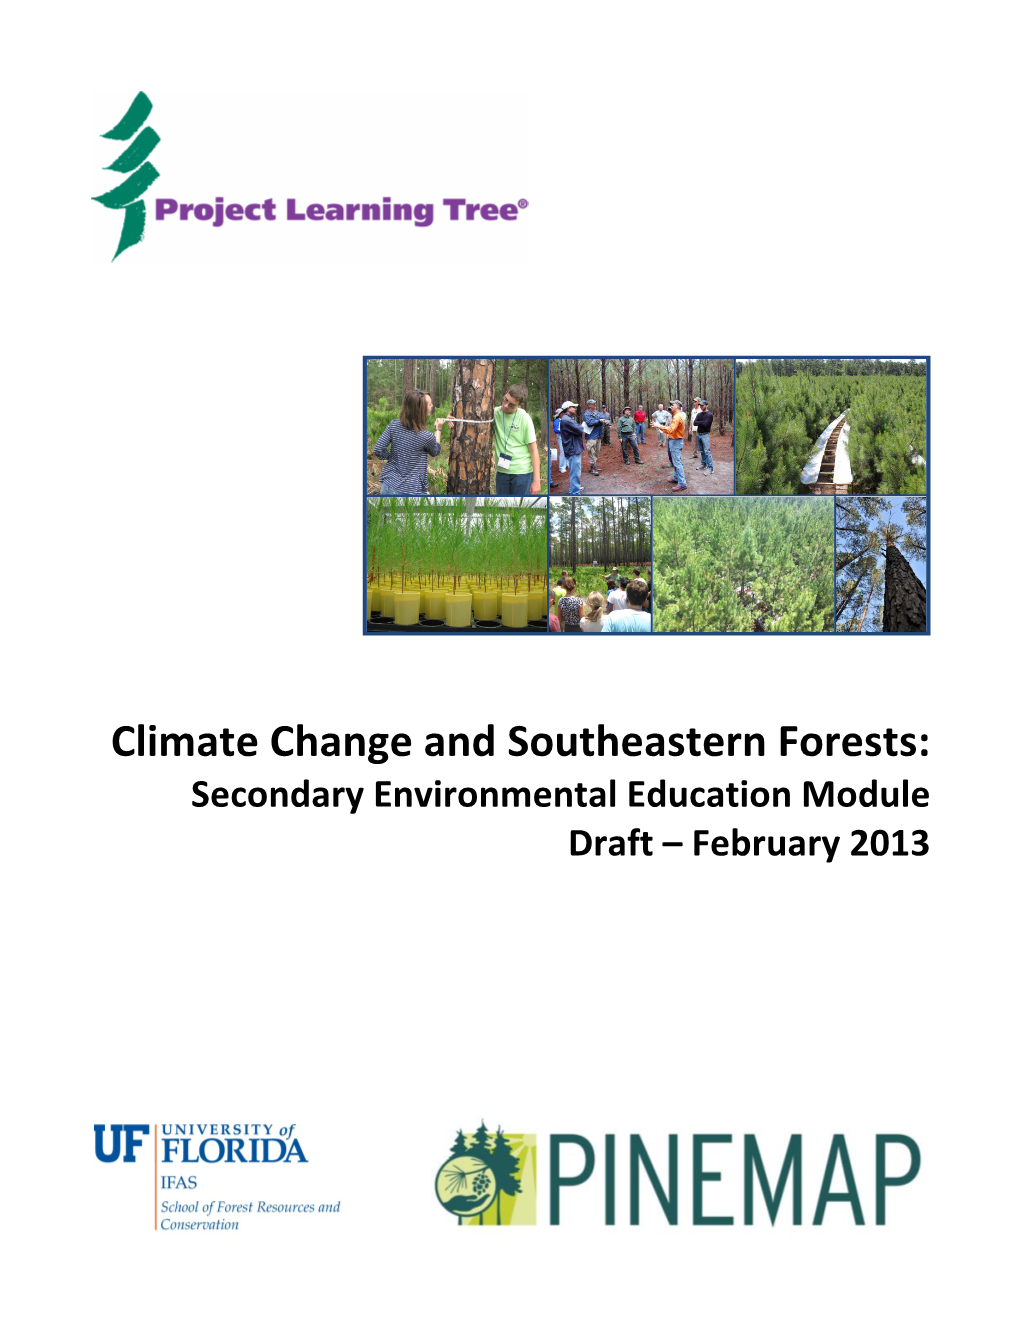 Climate Change and Southeastern Forests: Secondary Environmental Education Module Draft – February 2013